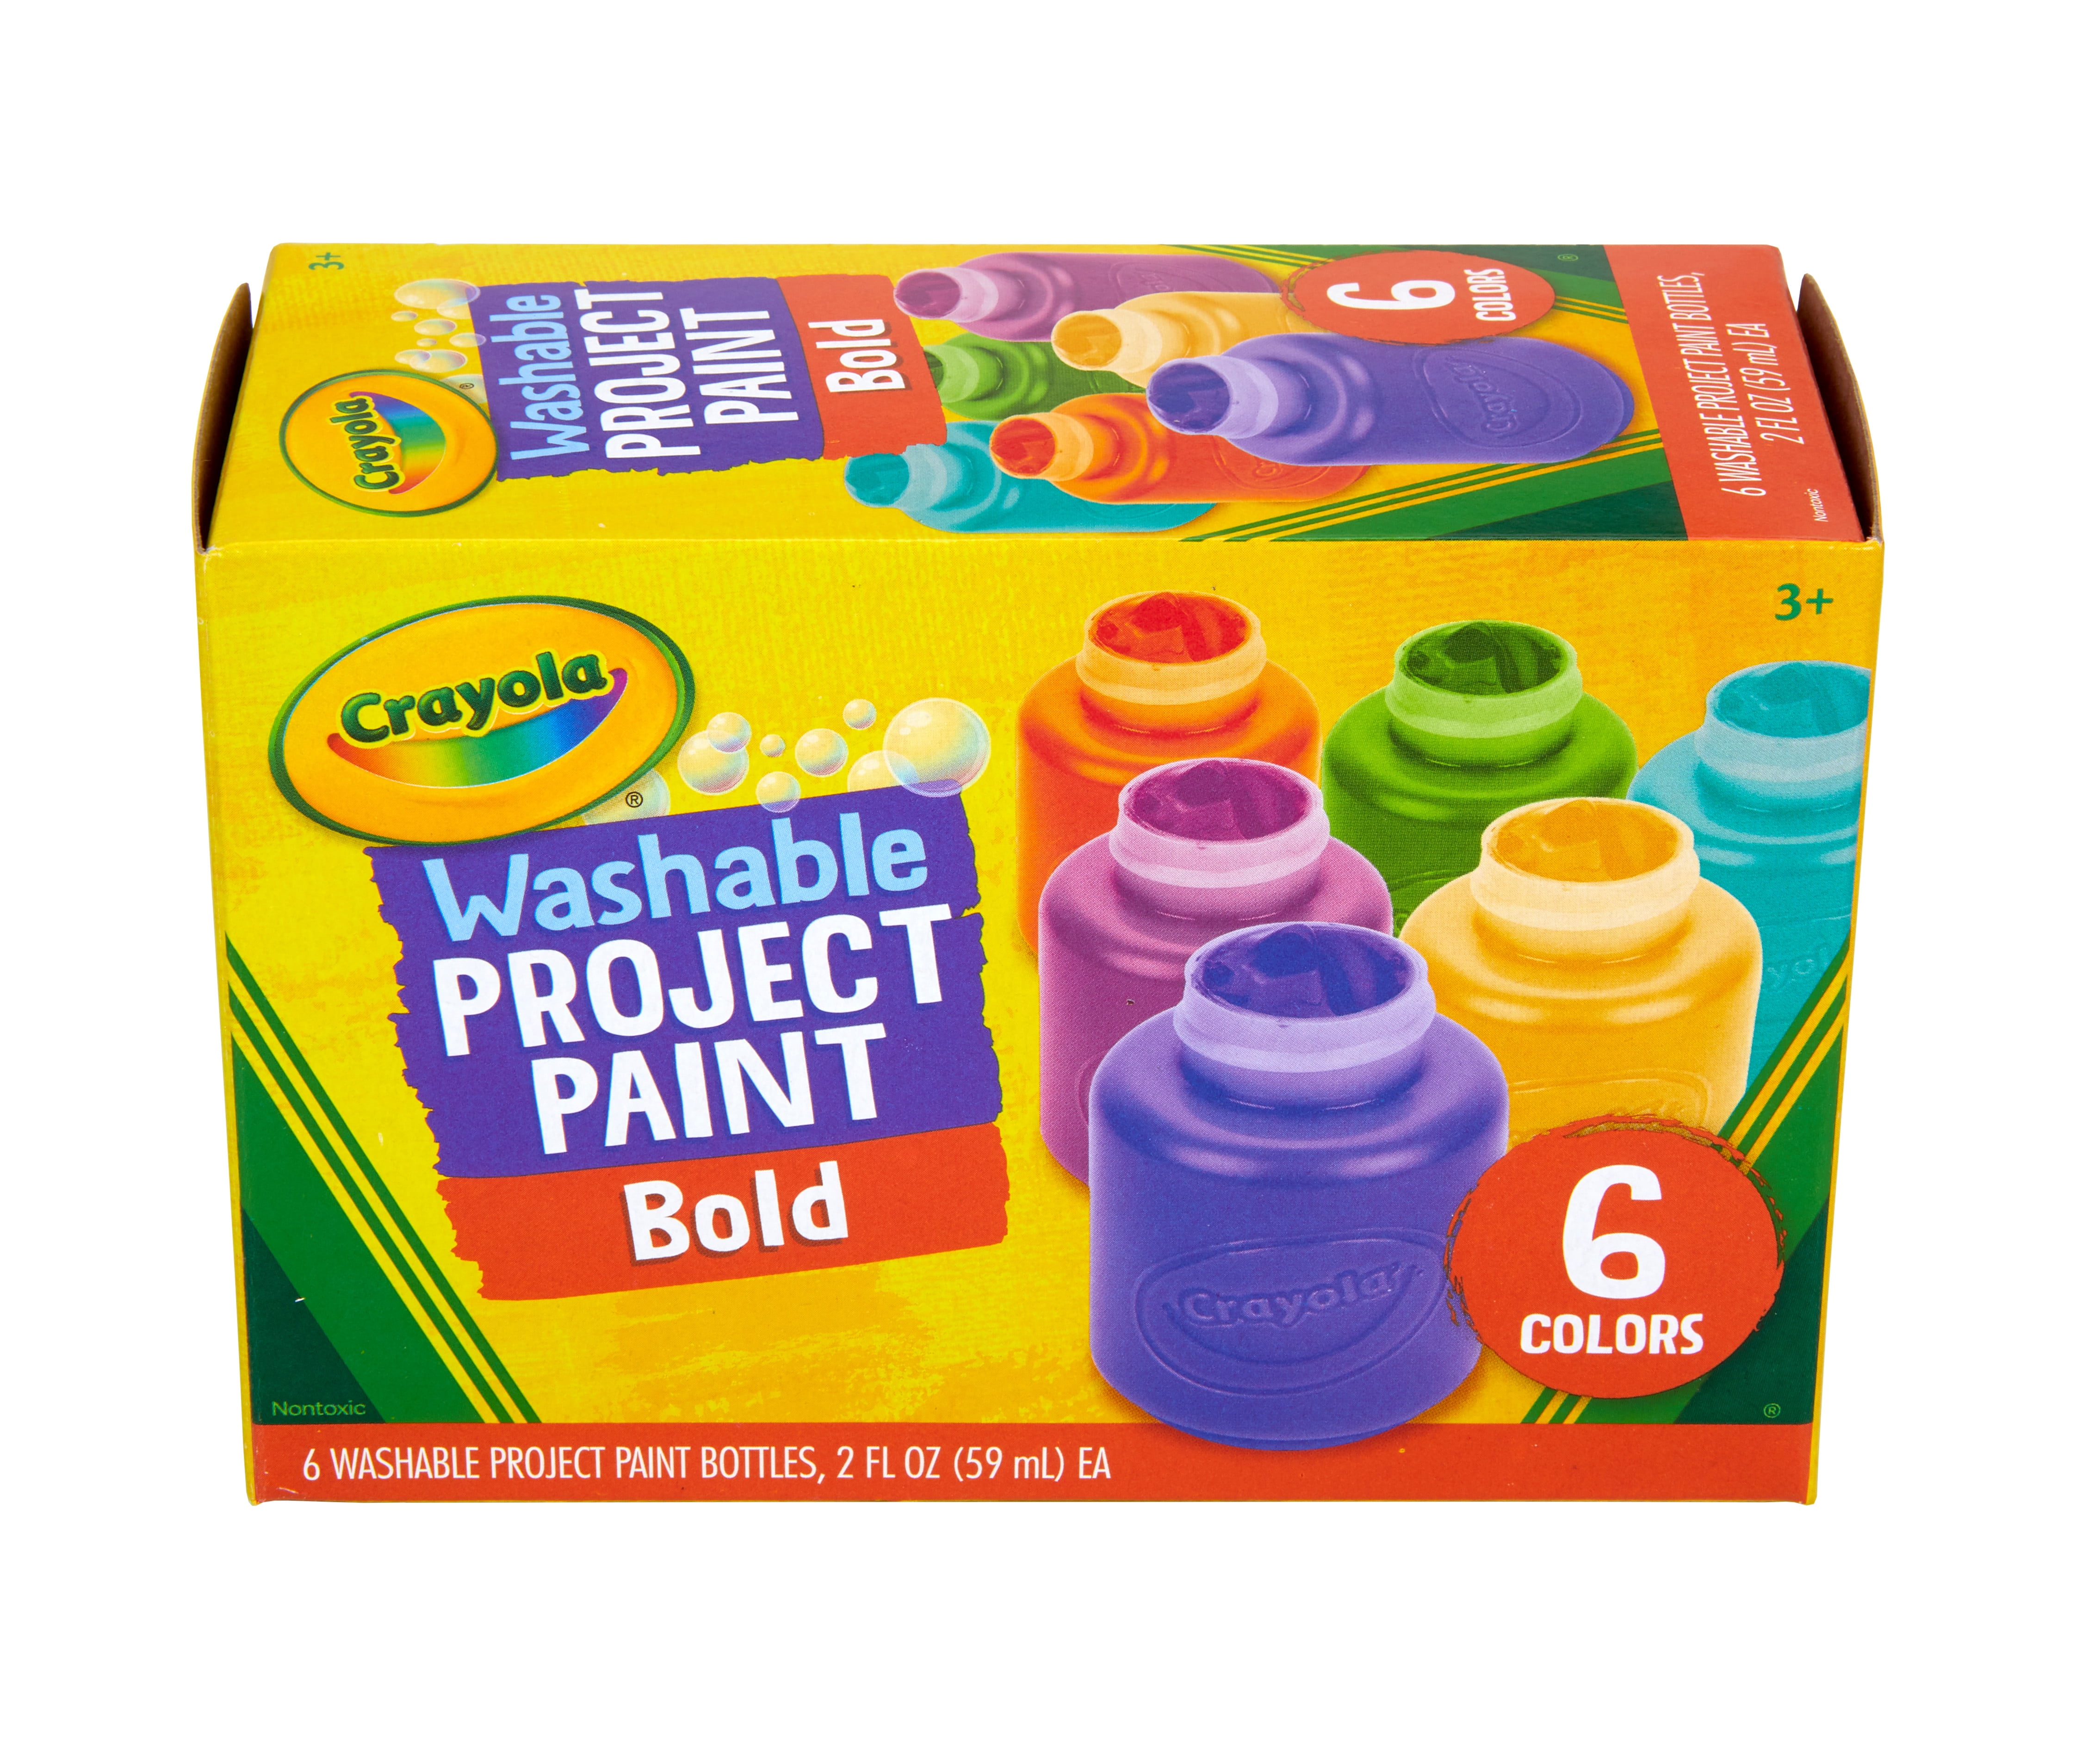  Crayola Washable Kid's Paint, Assorted Colors, Pack of 10 :  Toys & Games